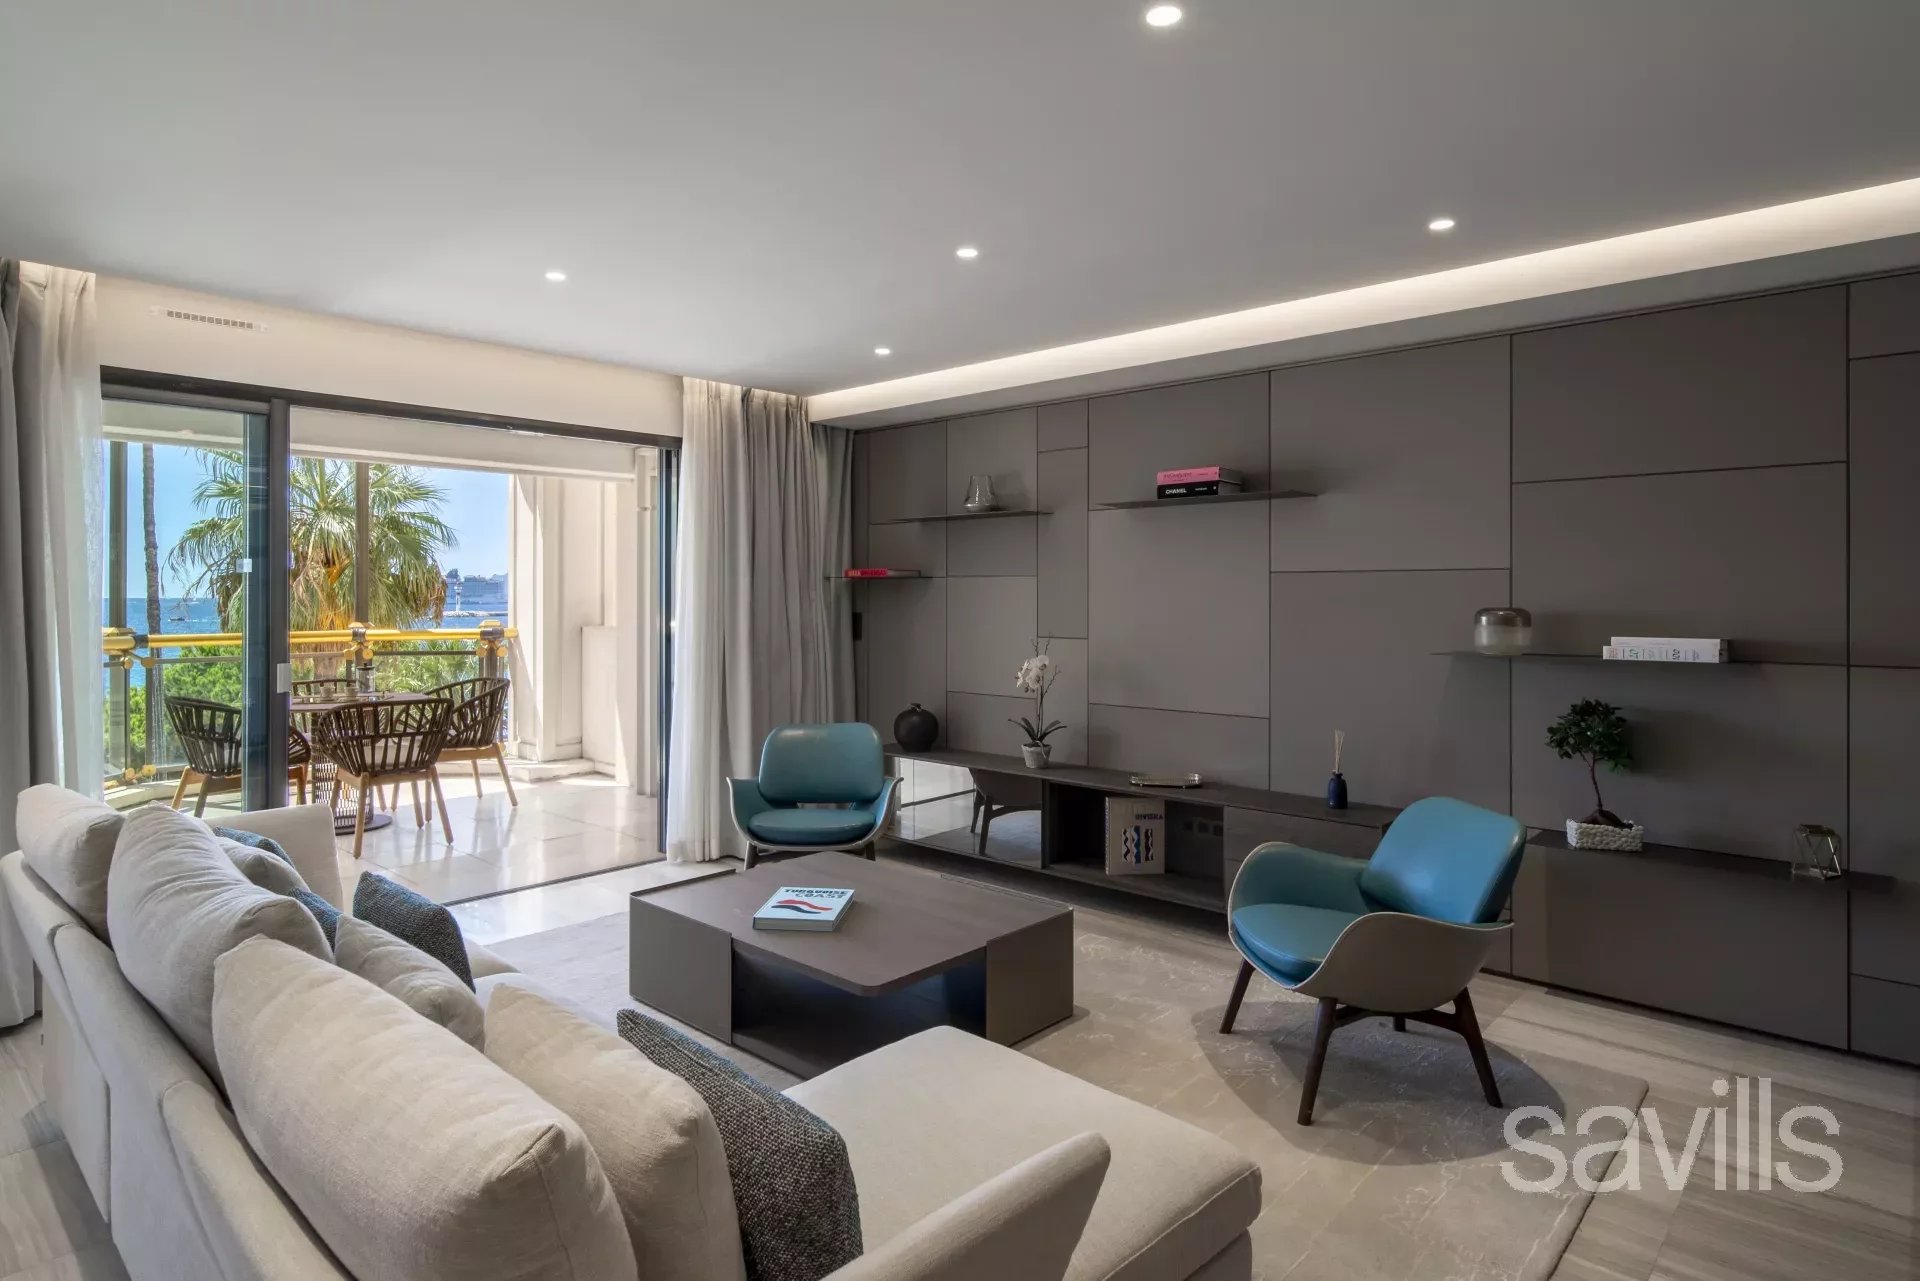 Contemporary Cannes apartment on the famous Croisette, benefitting from sea views and excellent facilities.